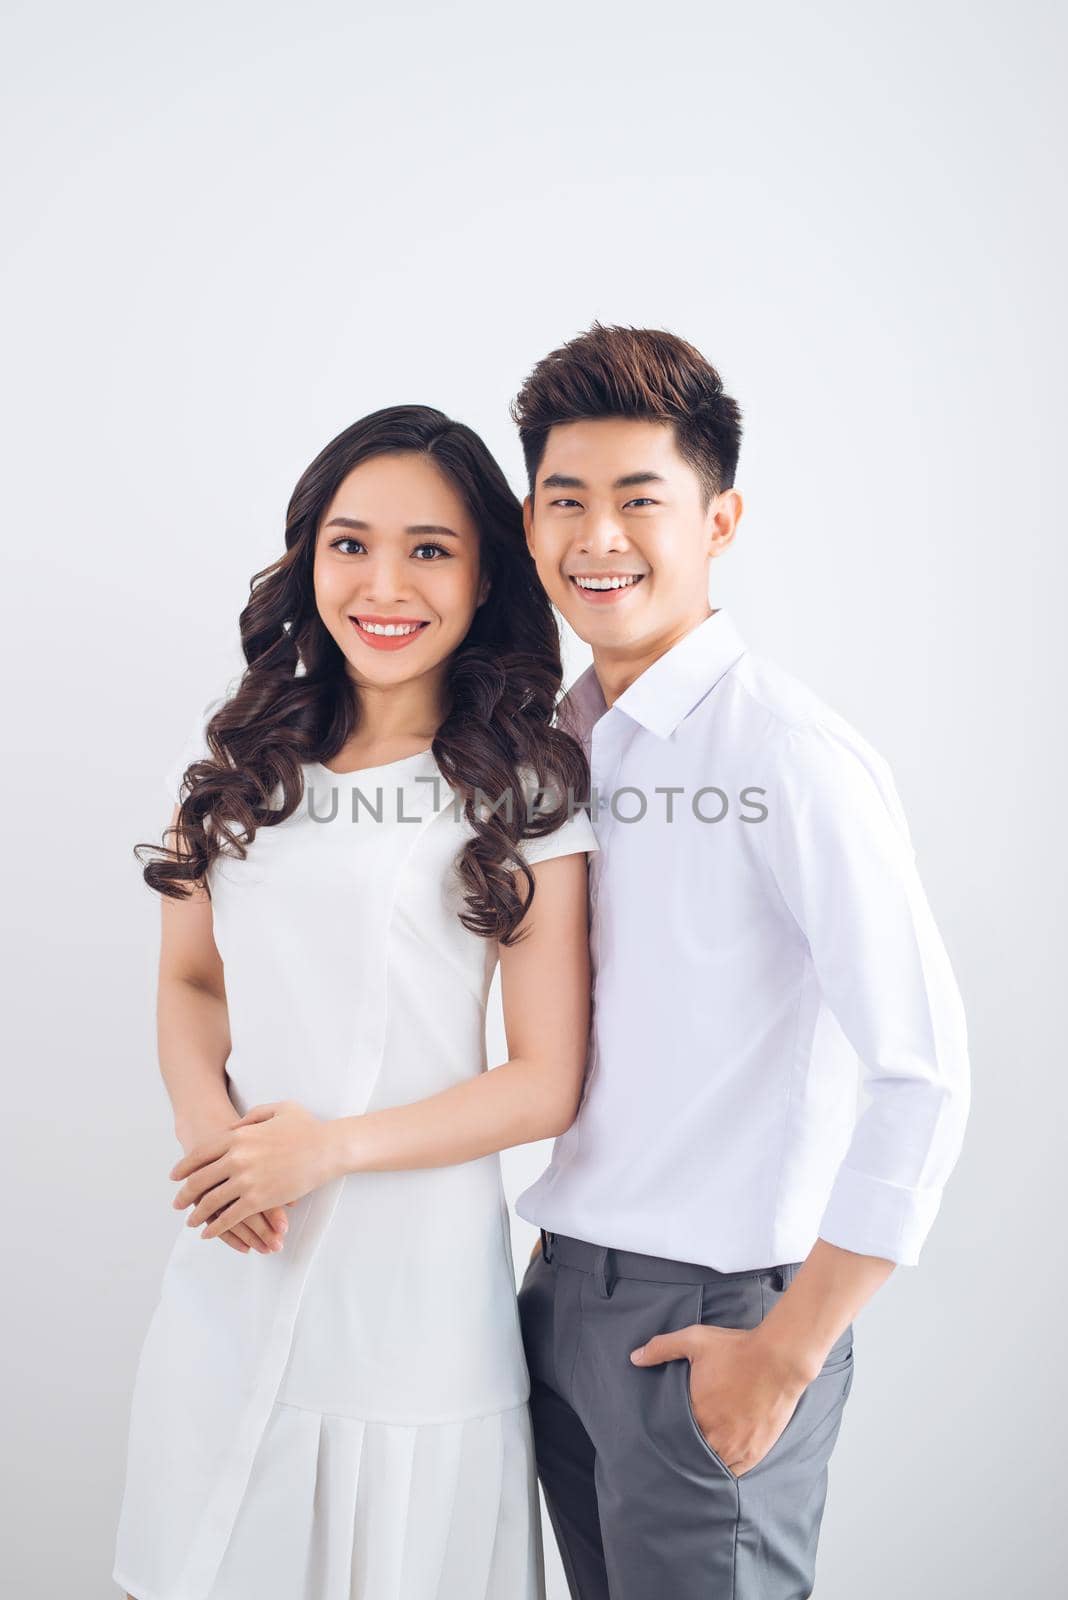 Happy together. Young in love couple smiling and standing against background